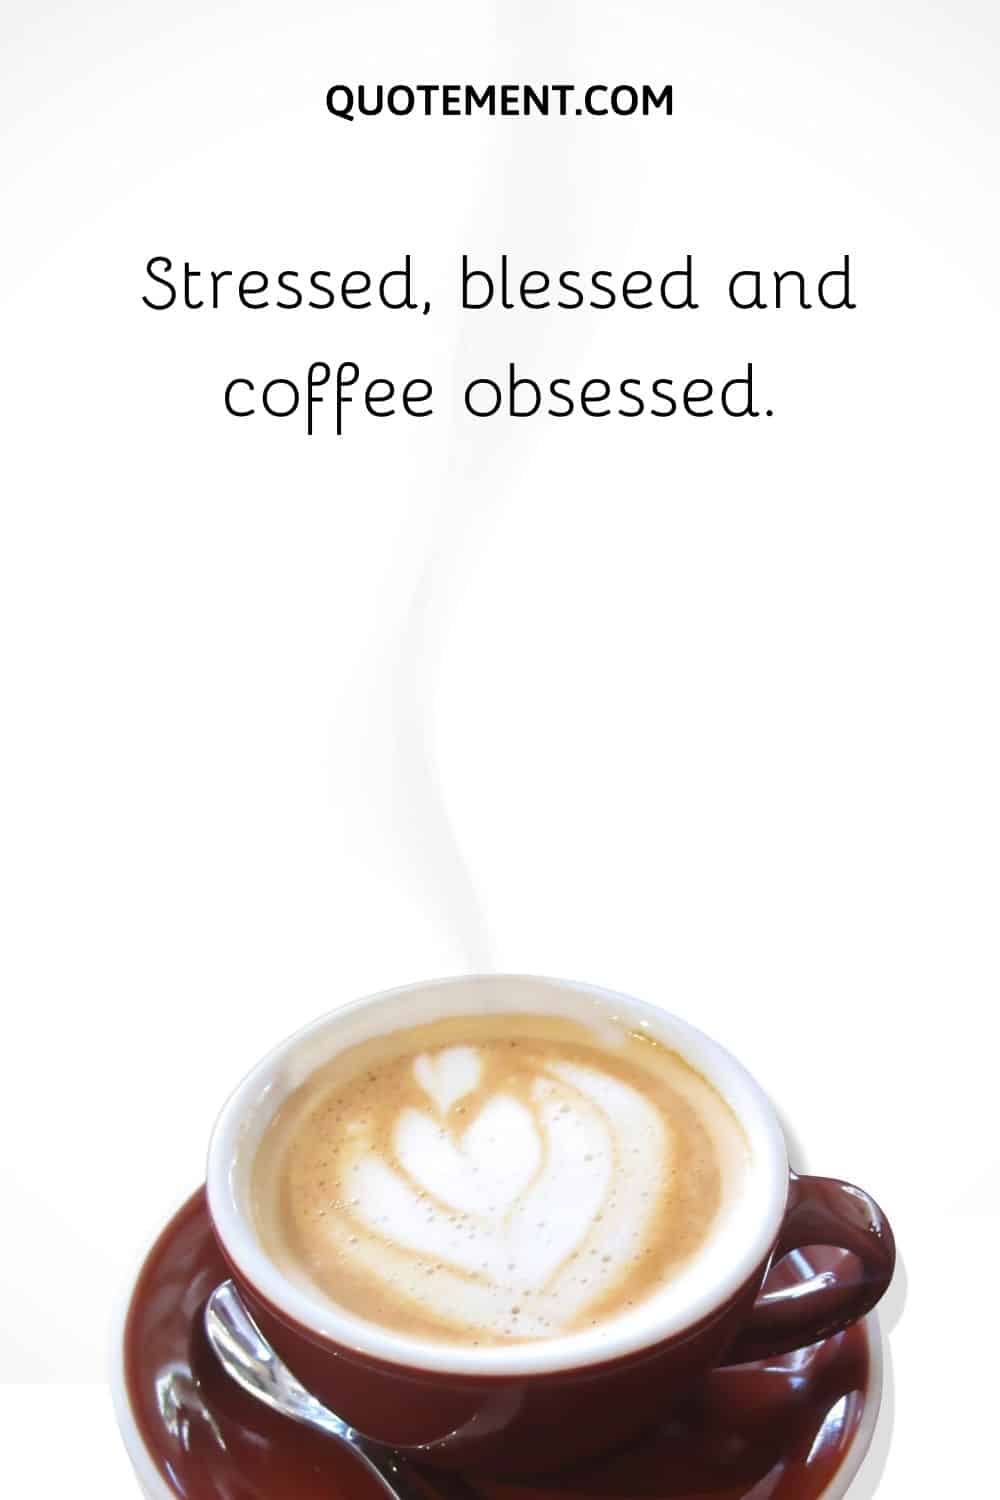 Stressed, blessed and coffee obsessed